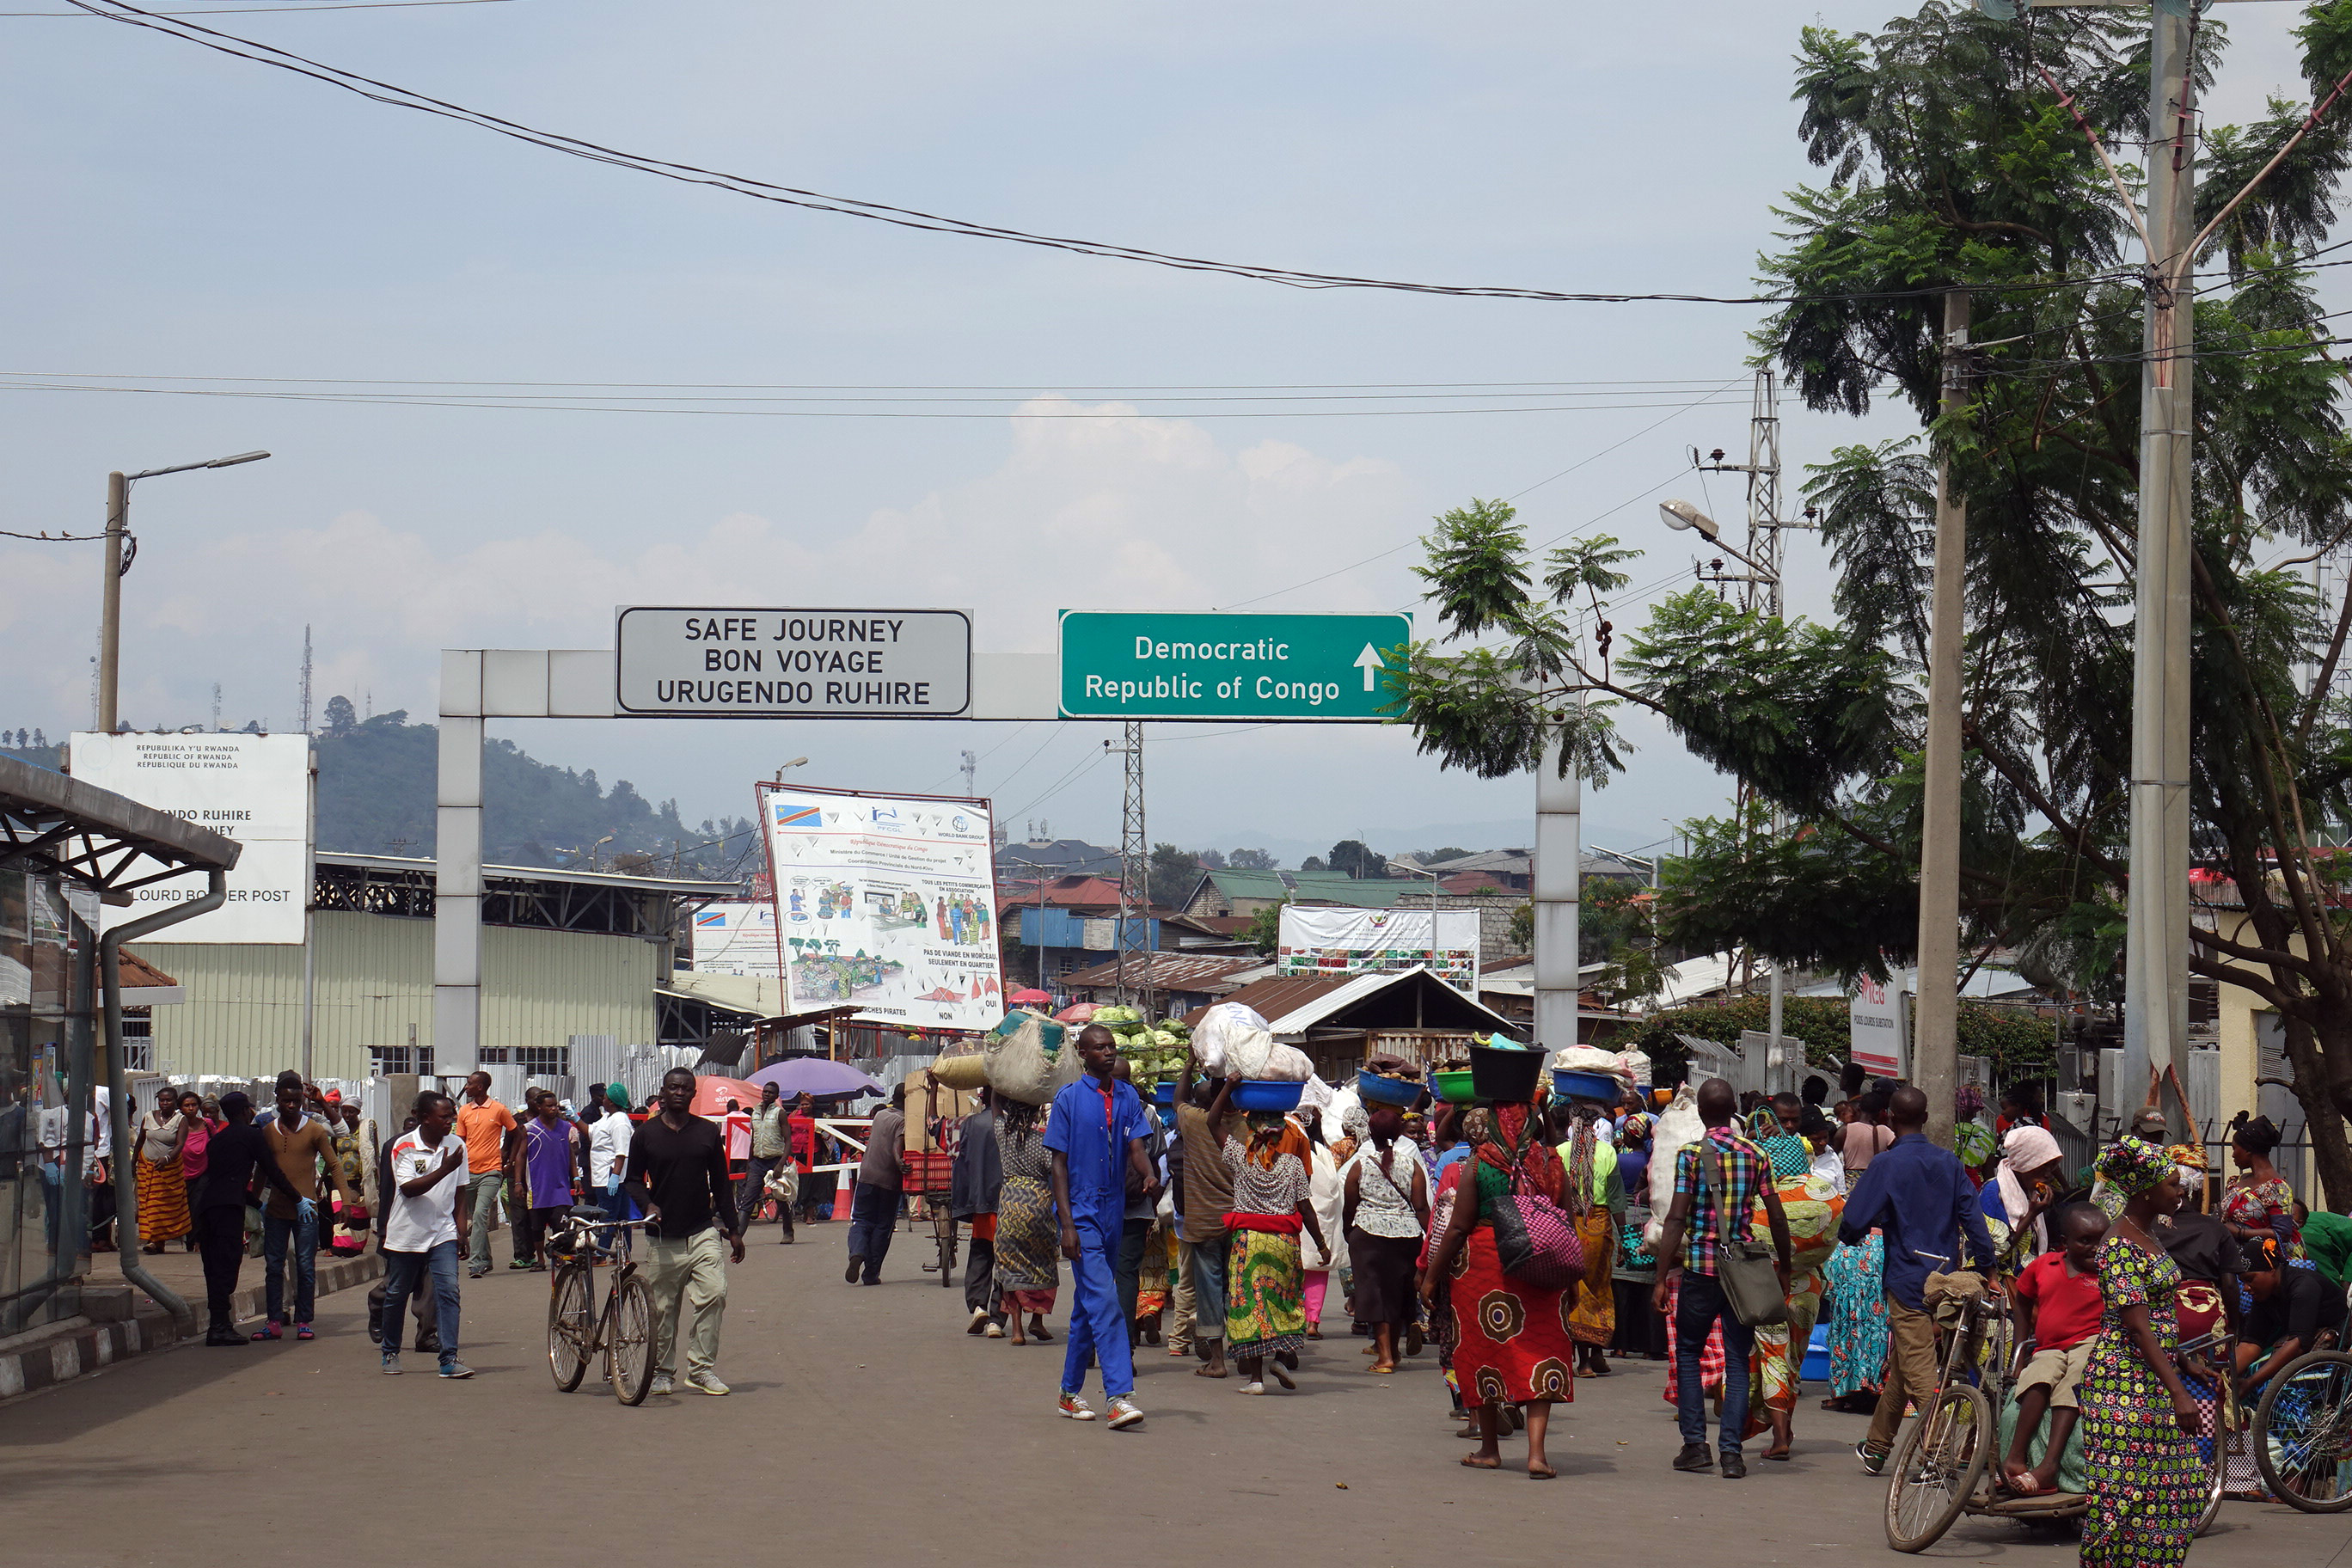 At the Petite Barrière border crossing between Rwanda and the Democratic Republic of Congo, there is a lively cross-border trade exchange.